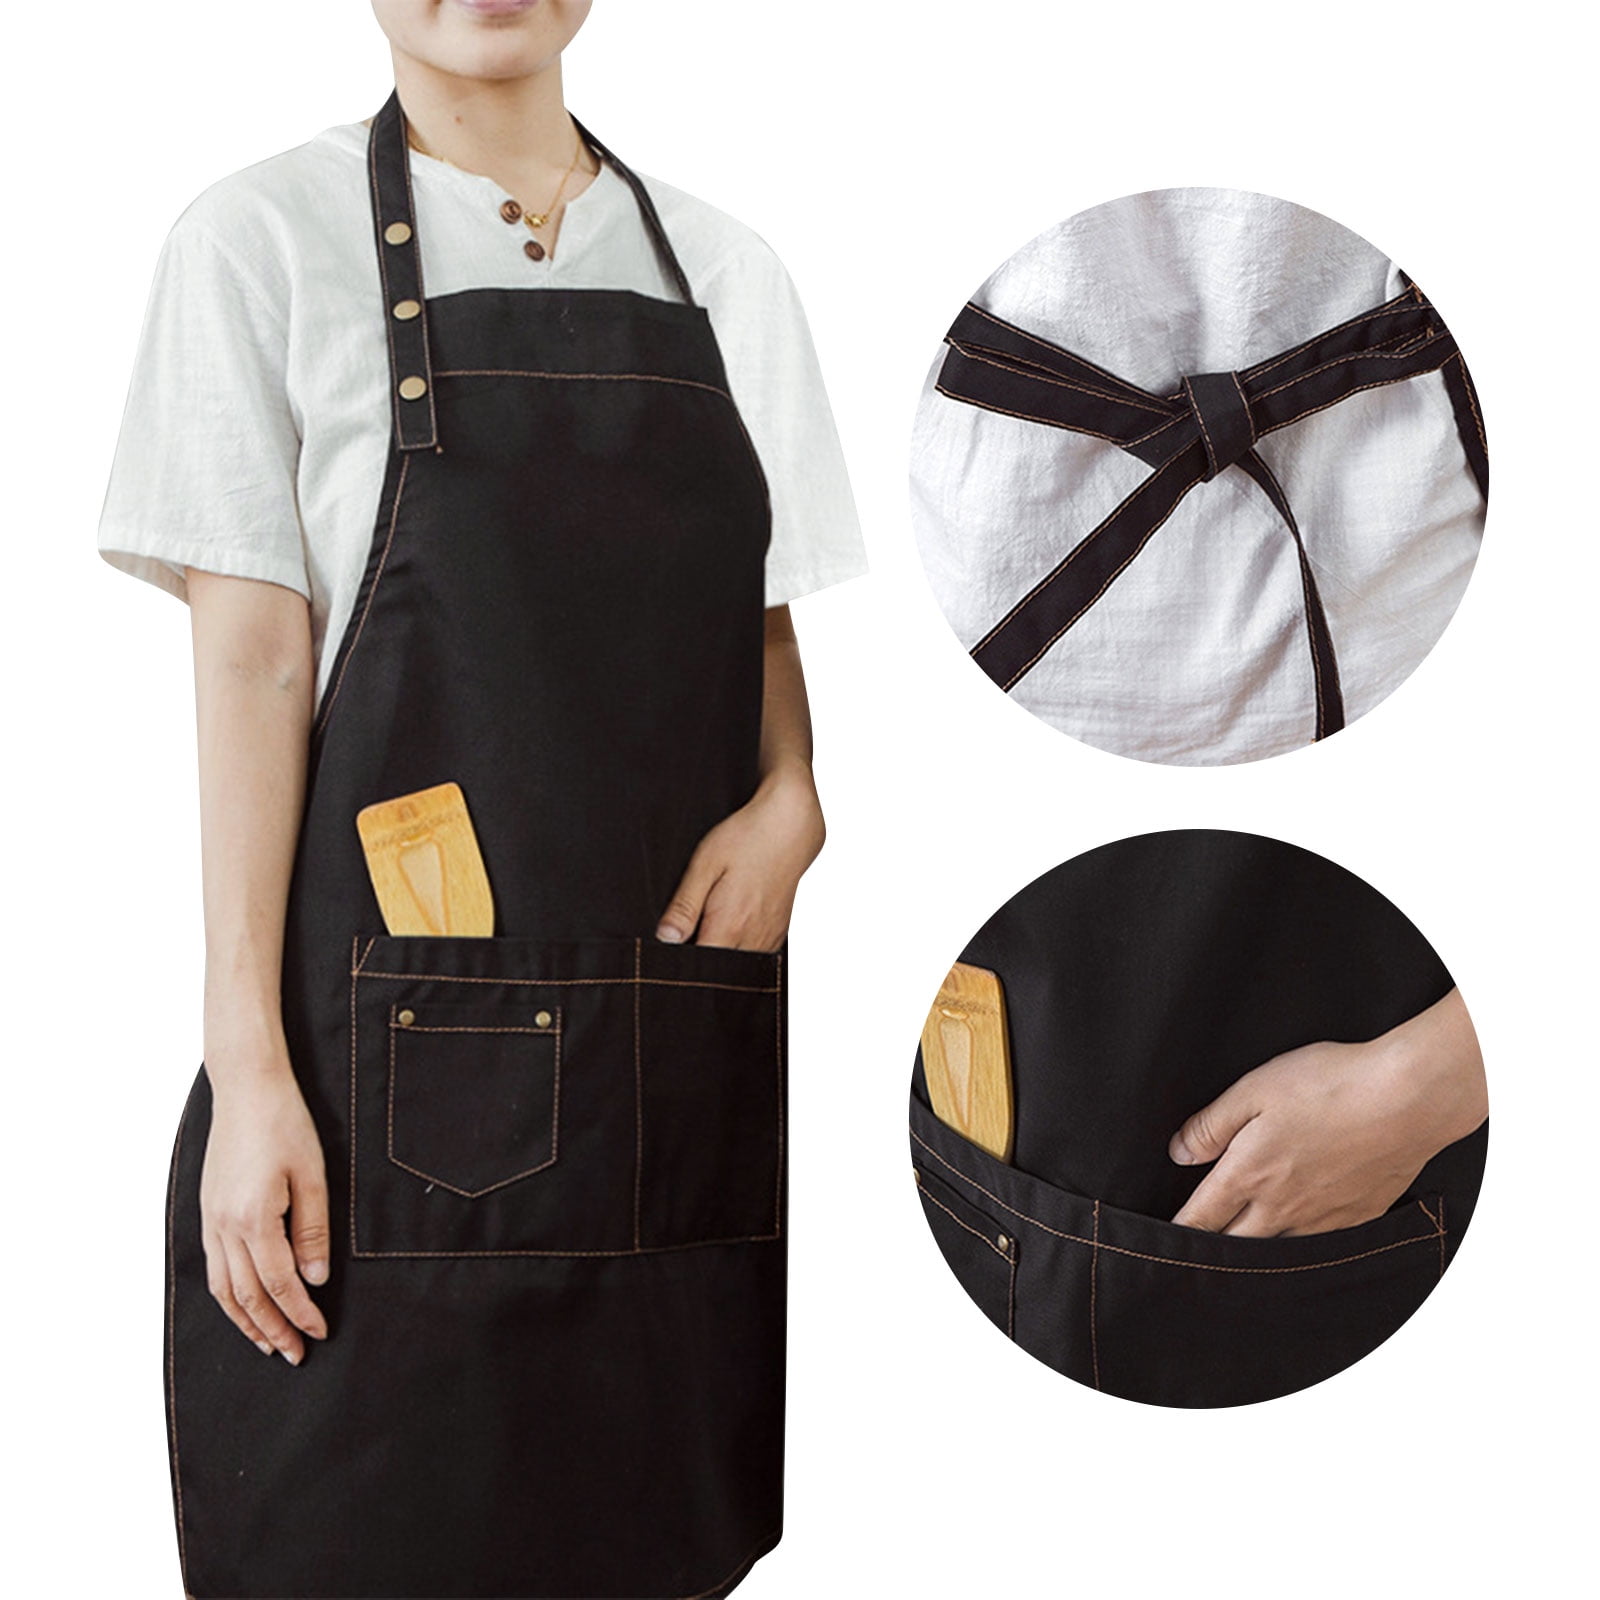 Felly Gardening Apron With Tool Pockets For Gardeners Women /& Men